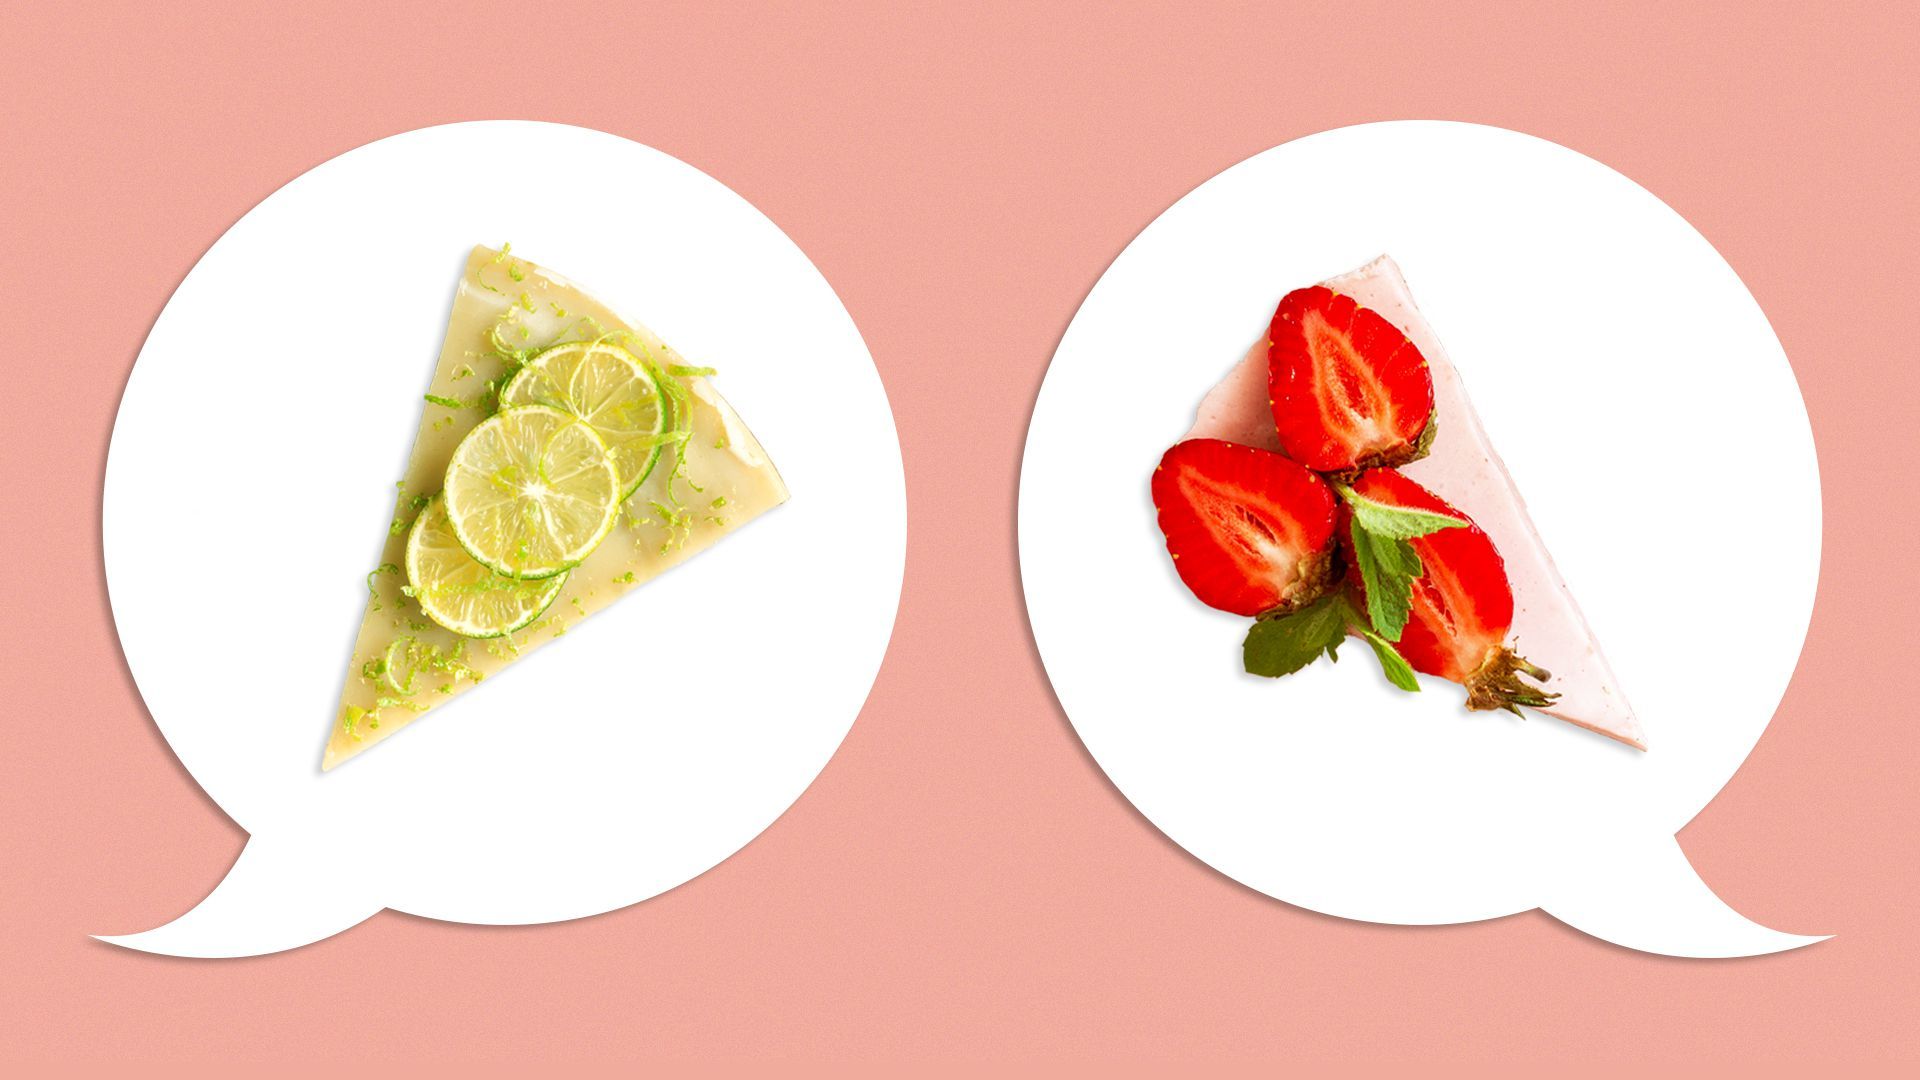 Illustration of two speech bubbles. One with key lime pie in the bubble, the other with strawberry short cake in the bubble.